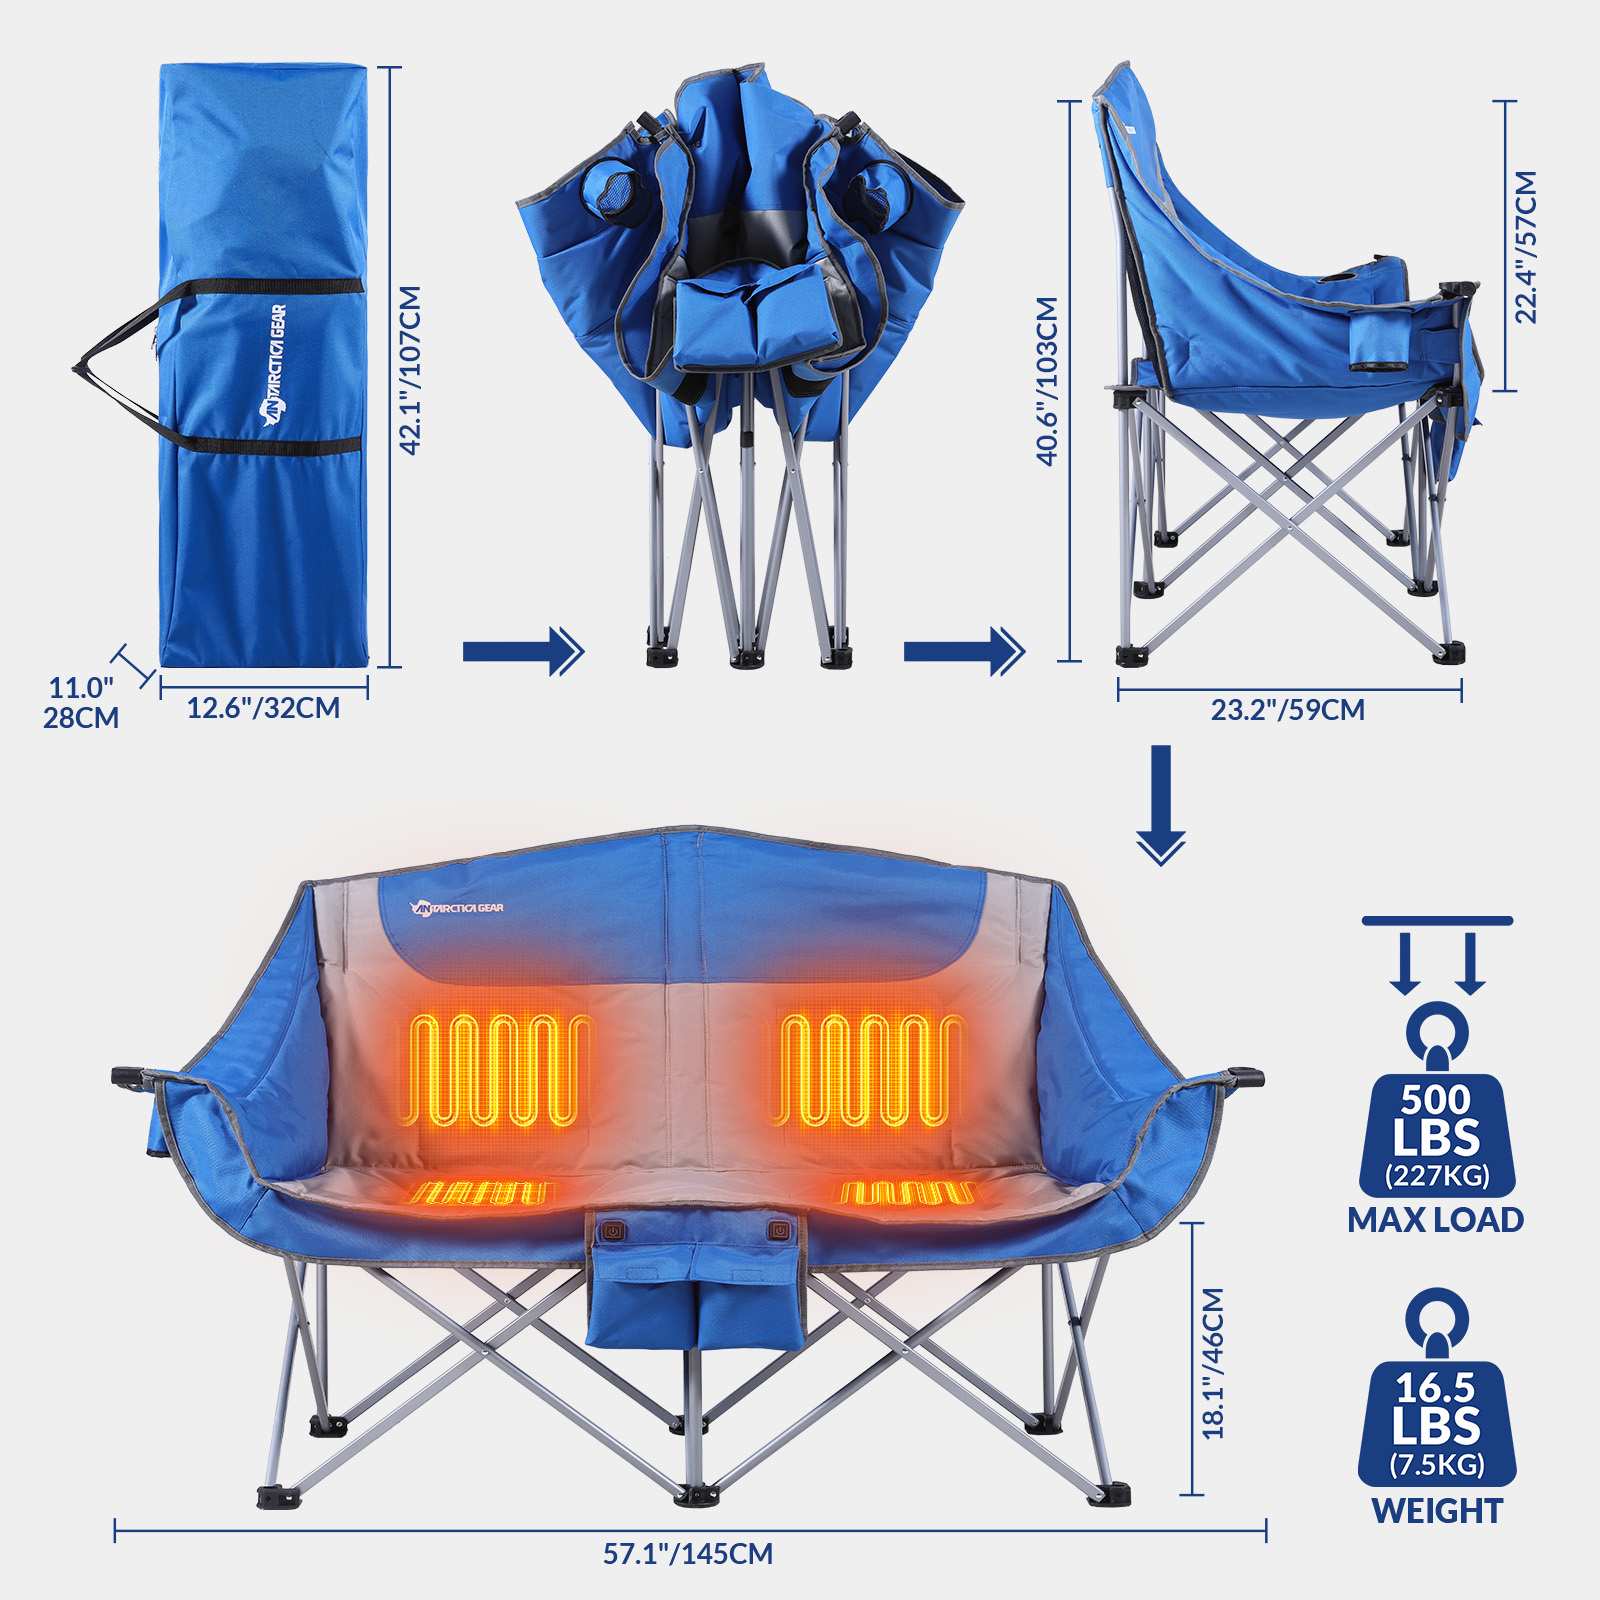 ANTARCTICA GEAR Heated Double Camping Chair, 2-Person Folding Chair Heated Portable Loveseat Chair